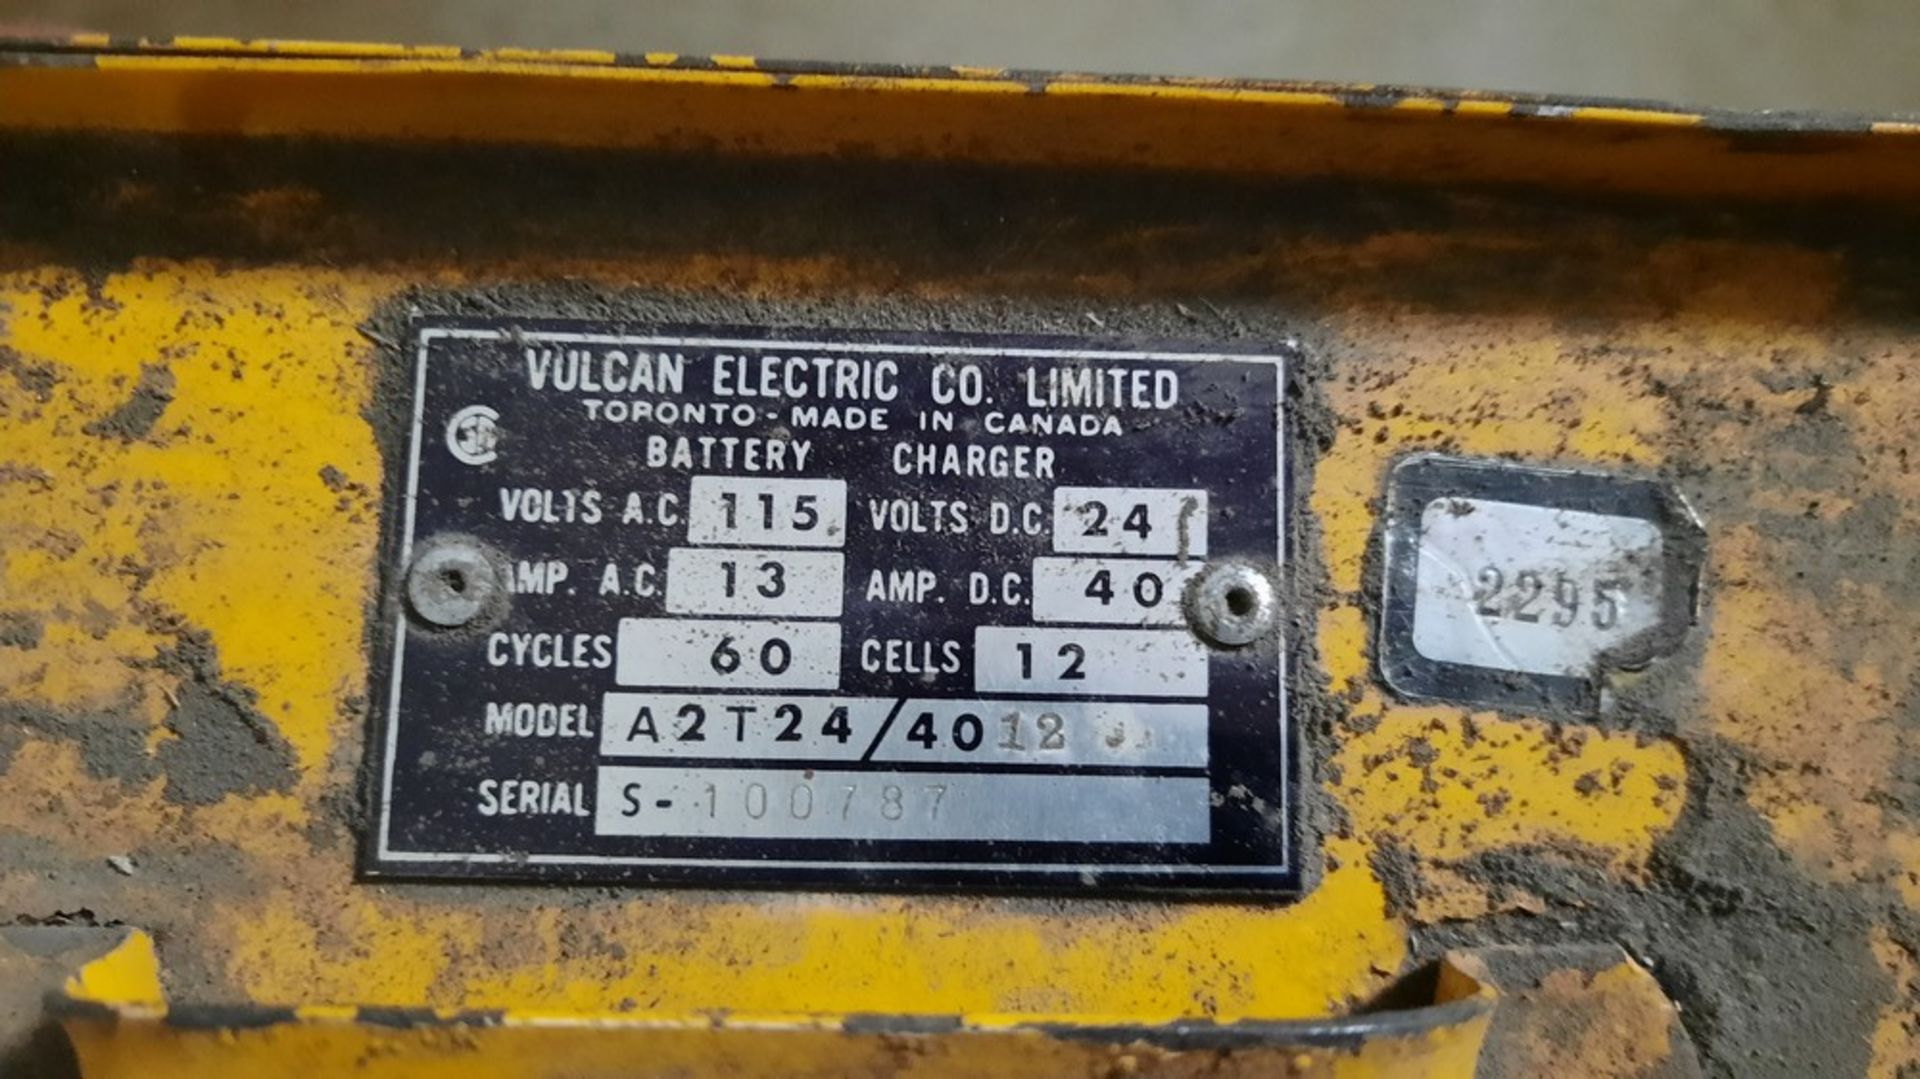 ATM Electric Lift, c/w VULCAN Charger (see data plates for details) - Image 8 of 8